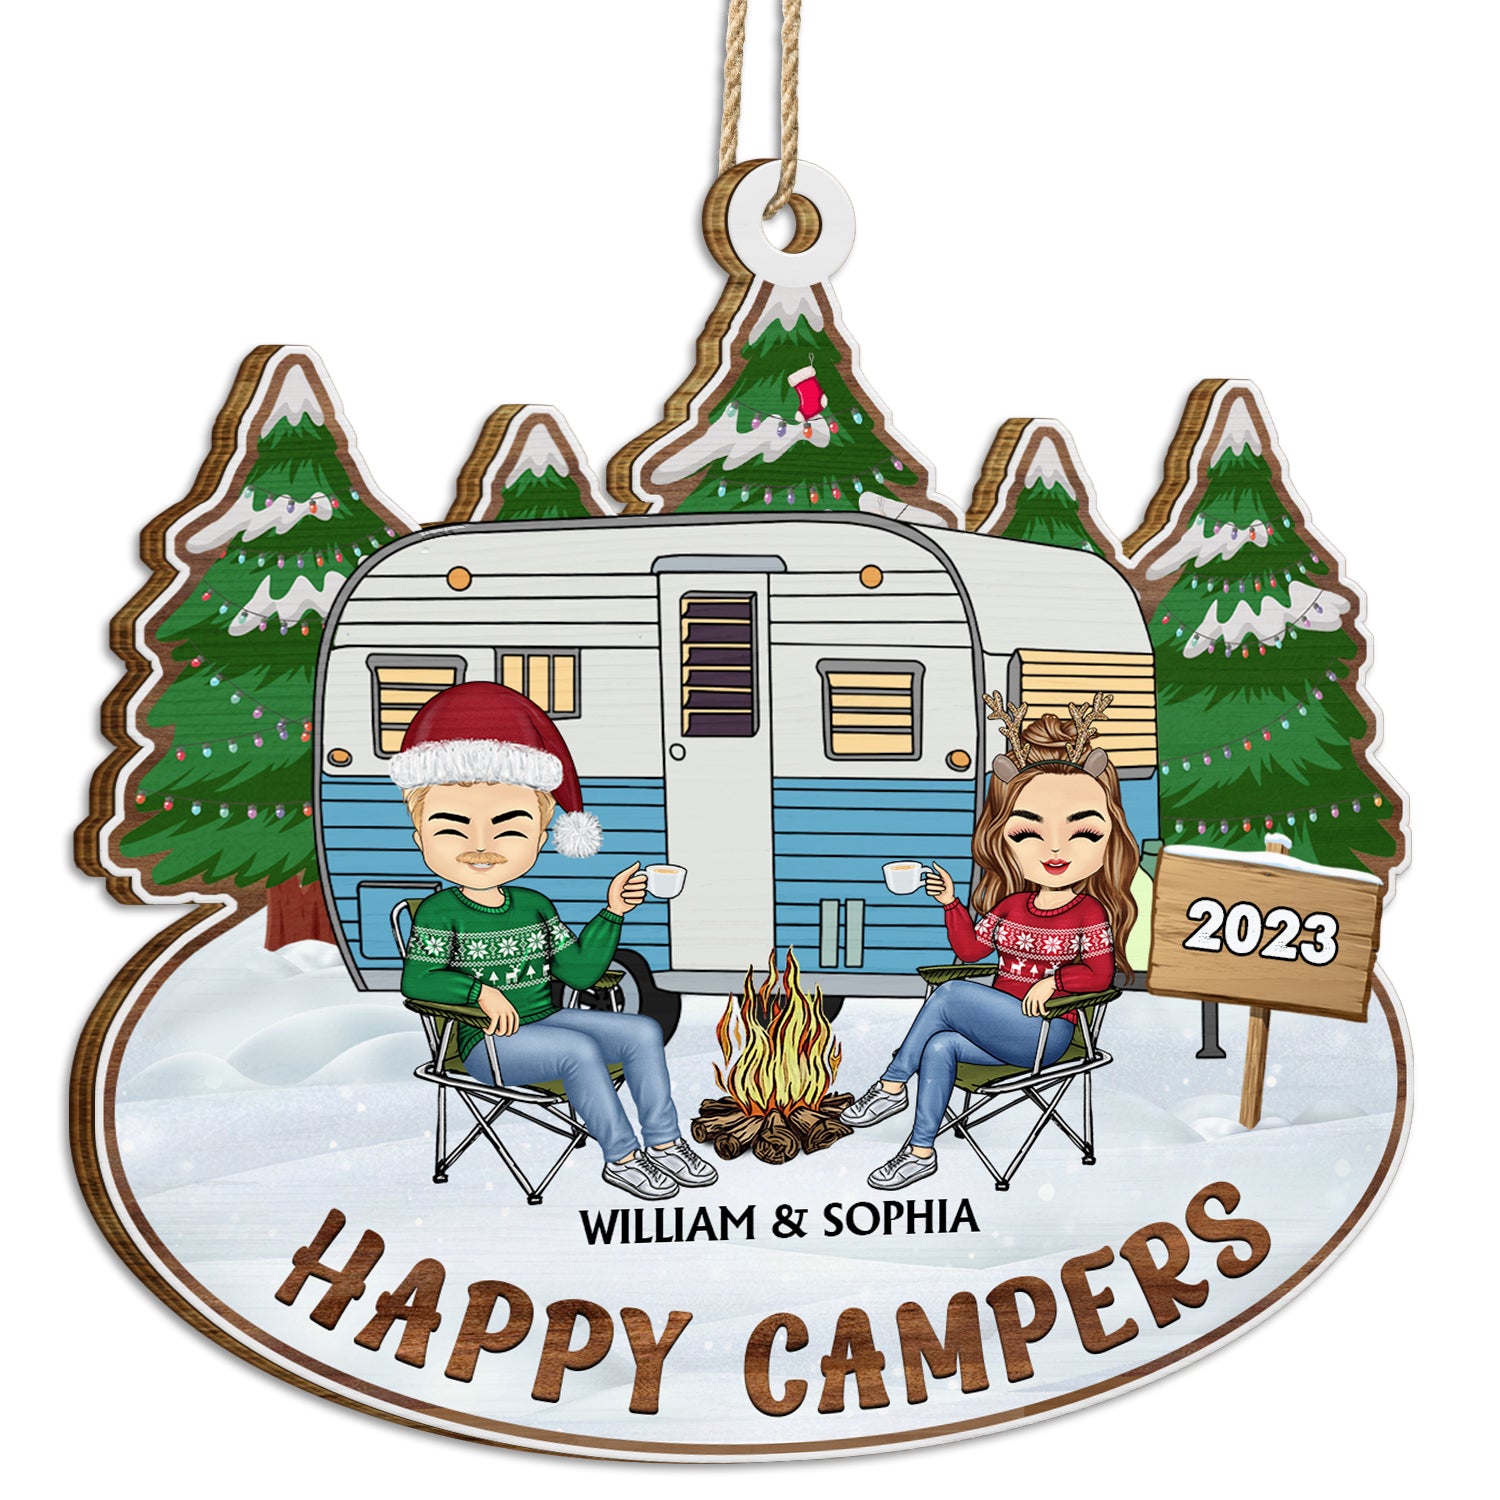 Happy Campers - Christmas Gifts For Couples, Camping Lovers - Personalized Wooden Cutout Ornament